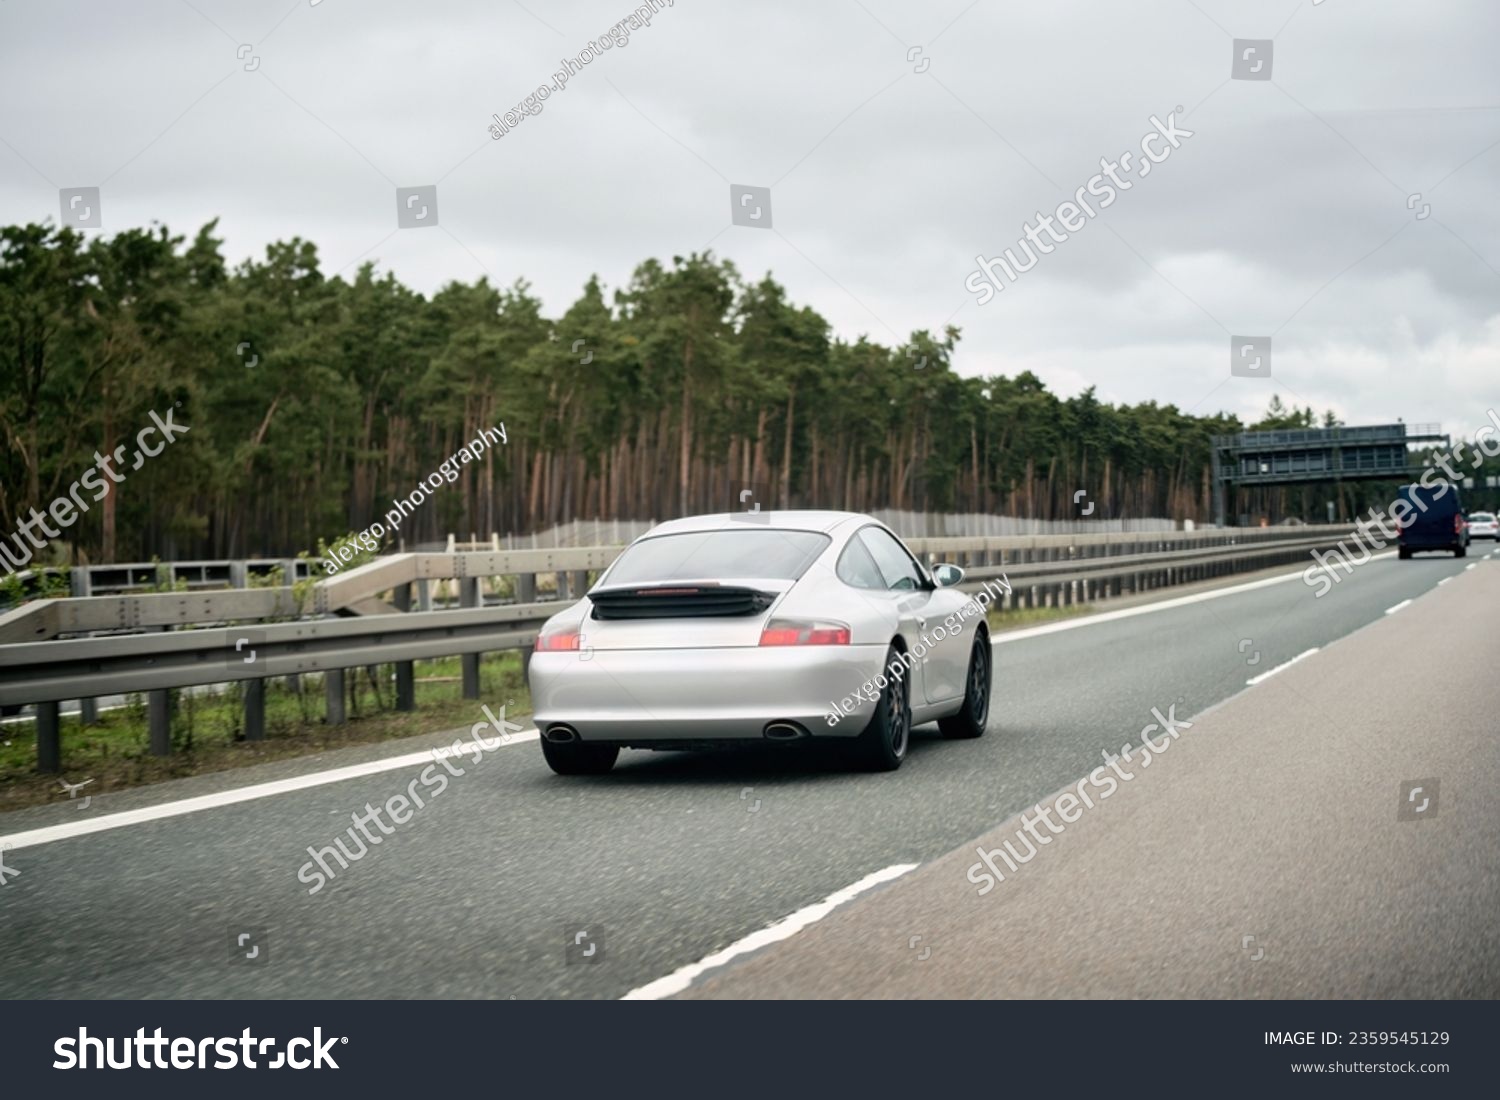 Exquisite Speed and Style on the Highway. Modern European Sportcar. Silver German roadster vehicle on the highway. Silver sport coupe. The expensive sports car on public roads. Autobahn speeding #2359545129